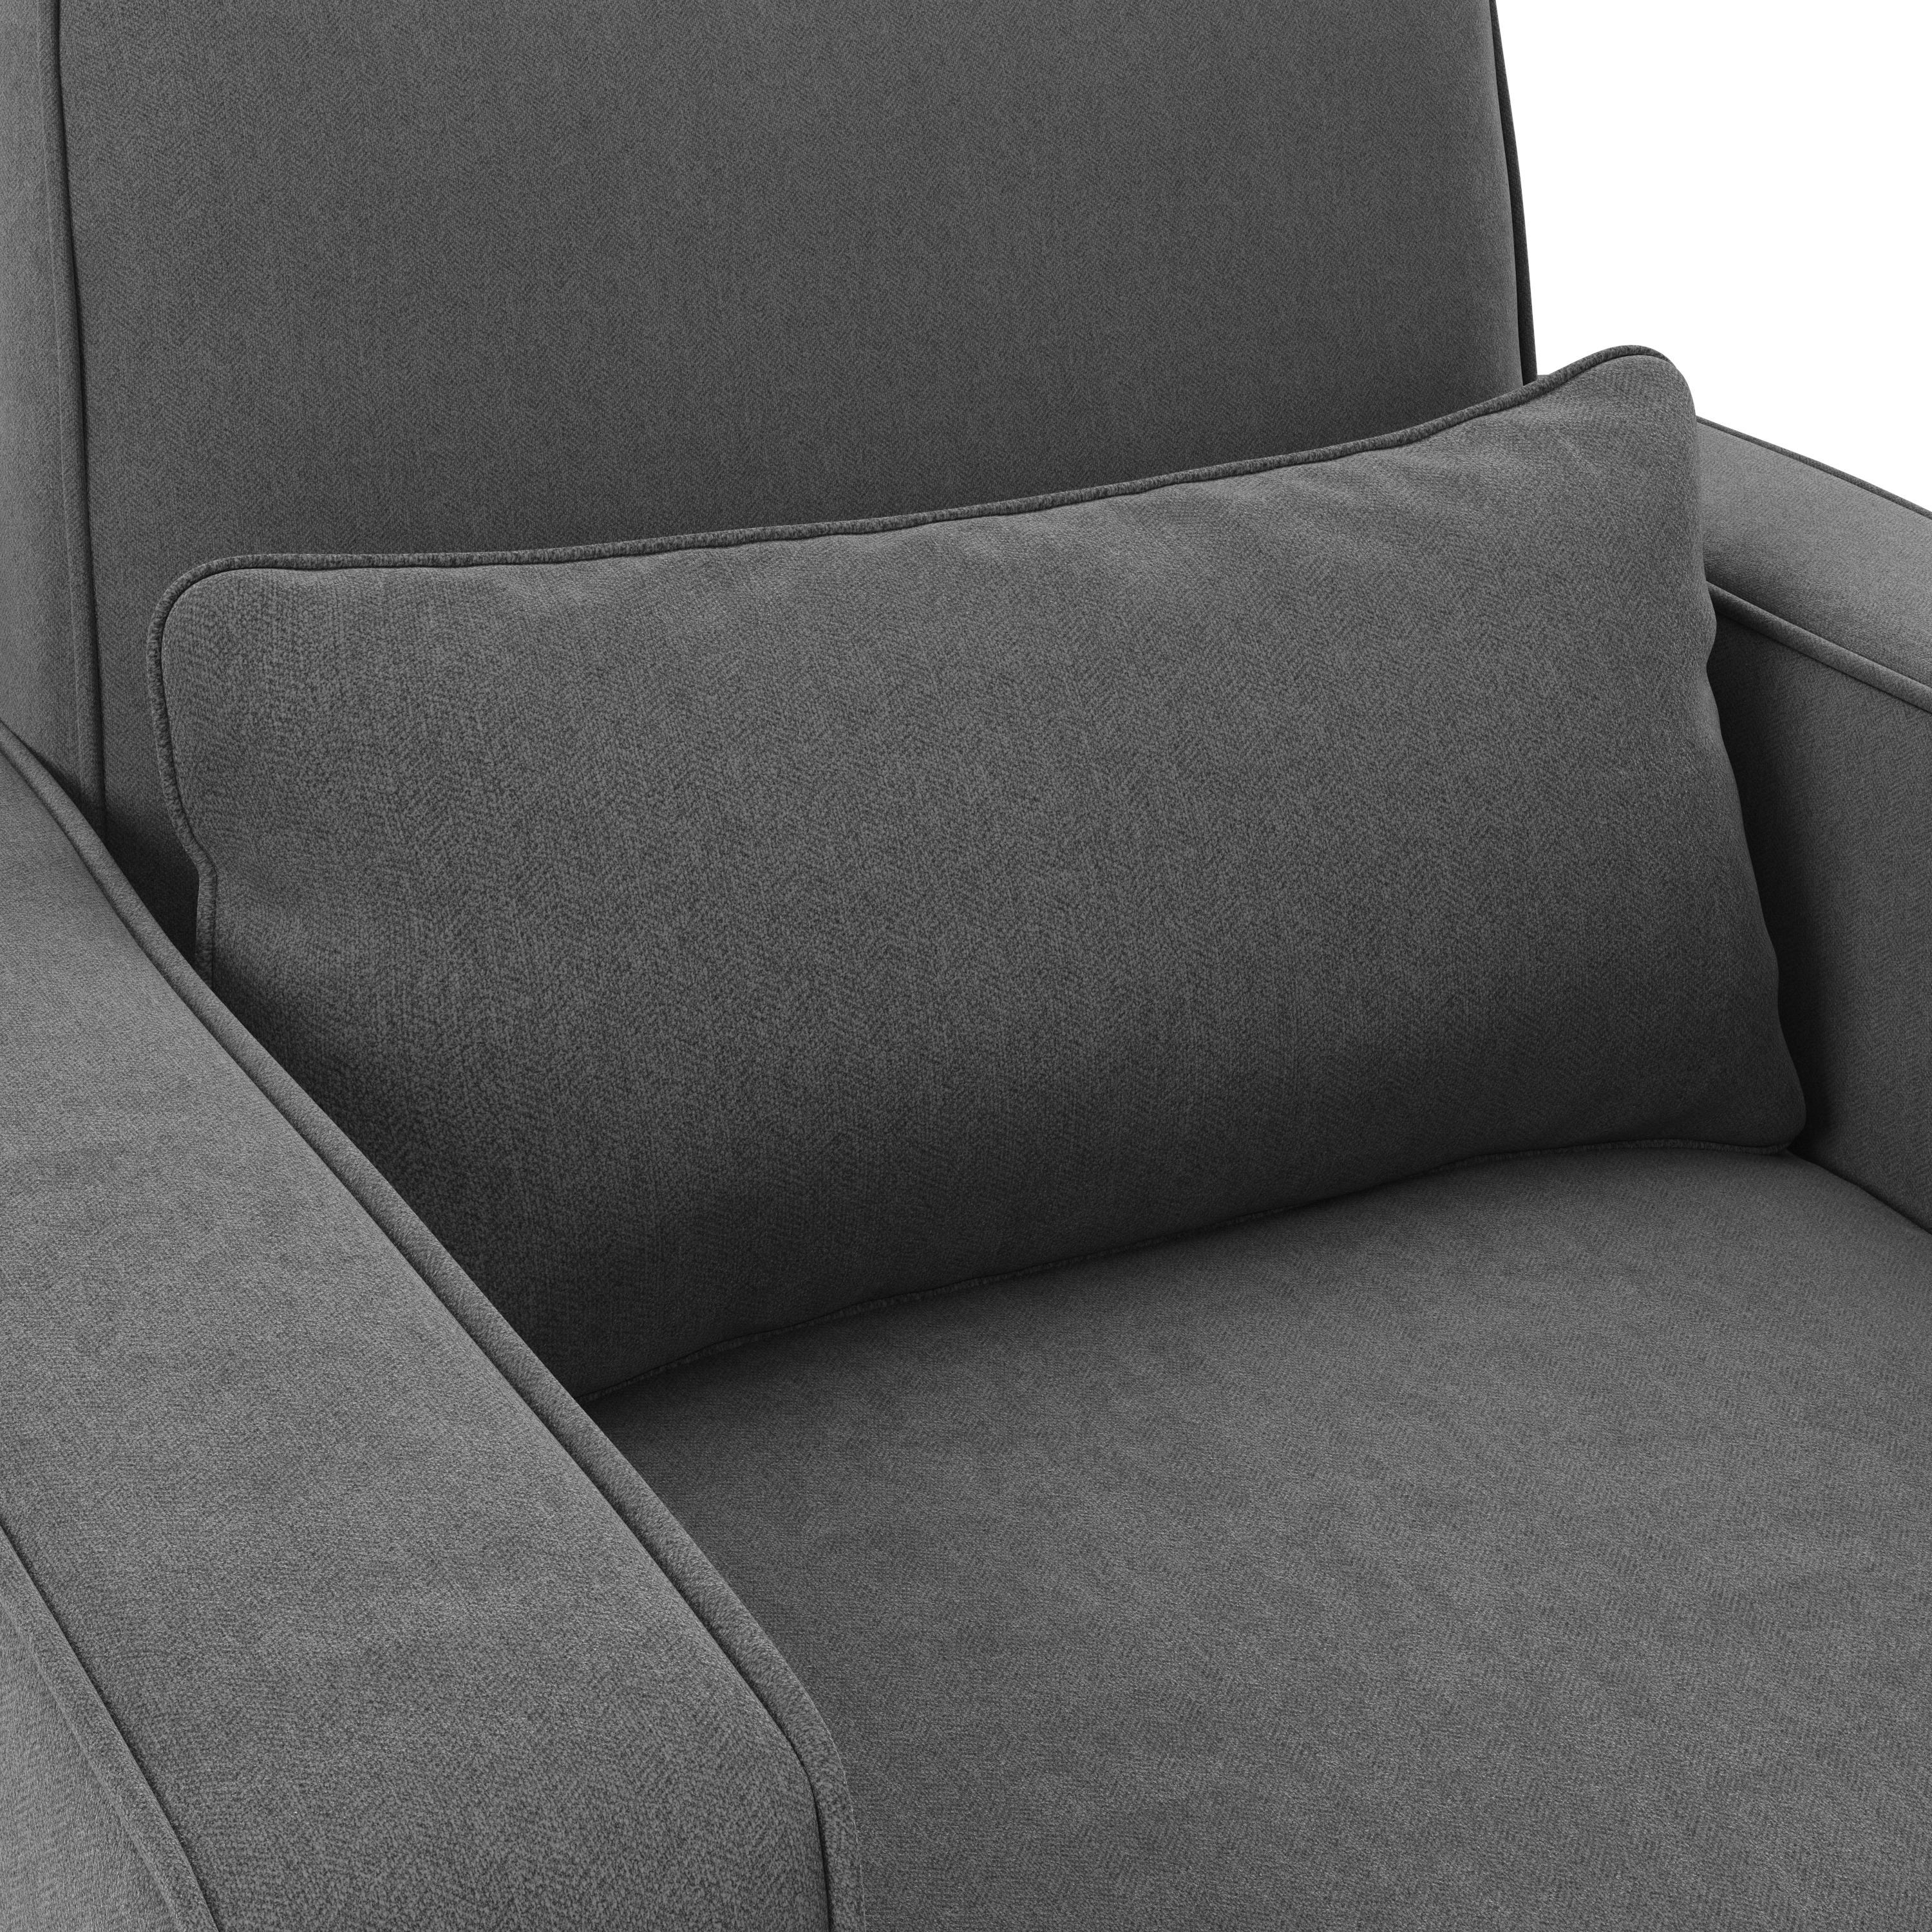 Shop Bush Furniture Stockton 102W Sectional Couch with Reversible Chaise Lounge, Accent Chair, and Ottoman 05 SKT021CGH #color_charcoal gray herringbone fabr